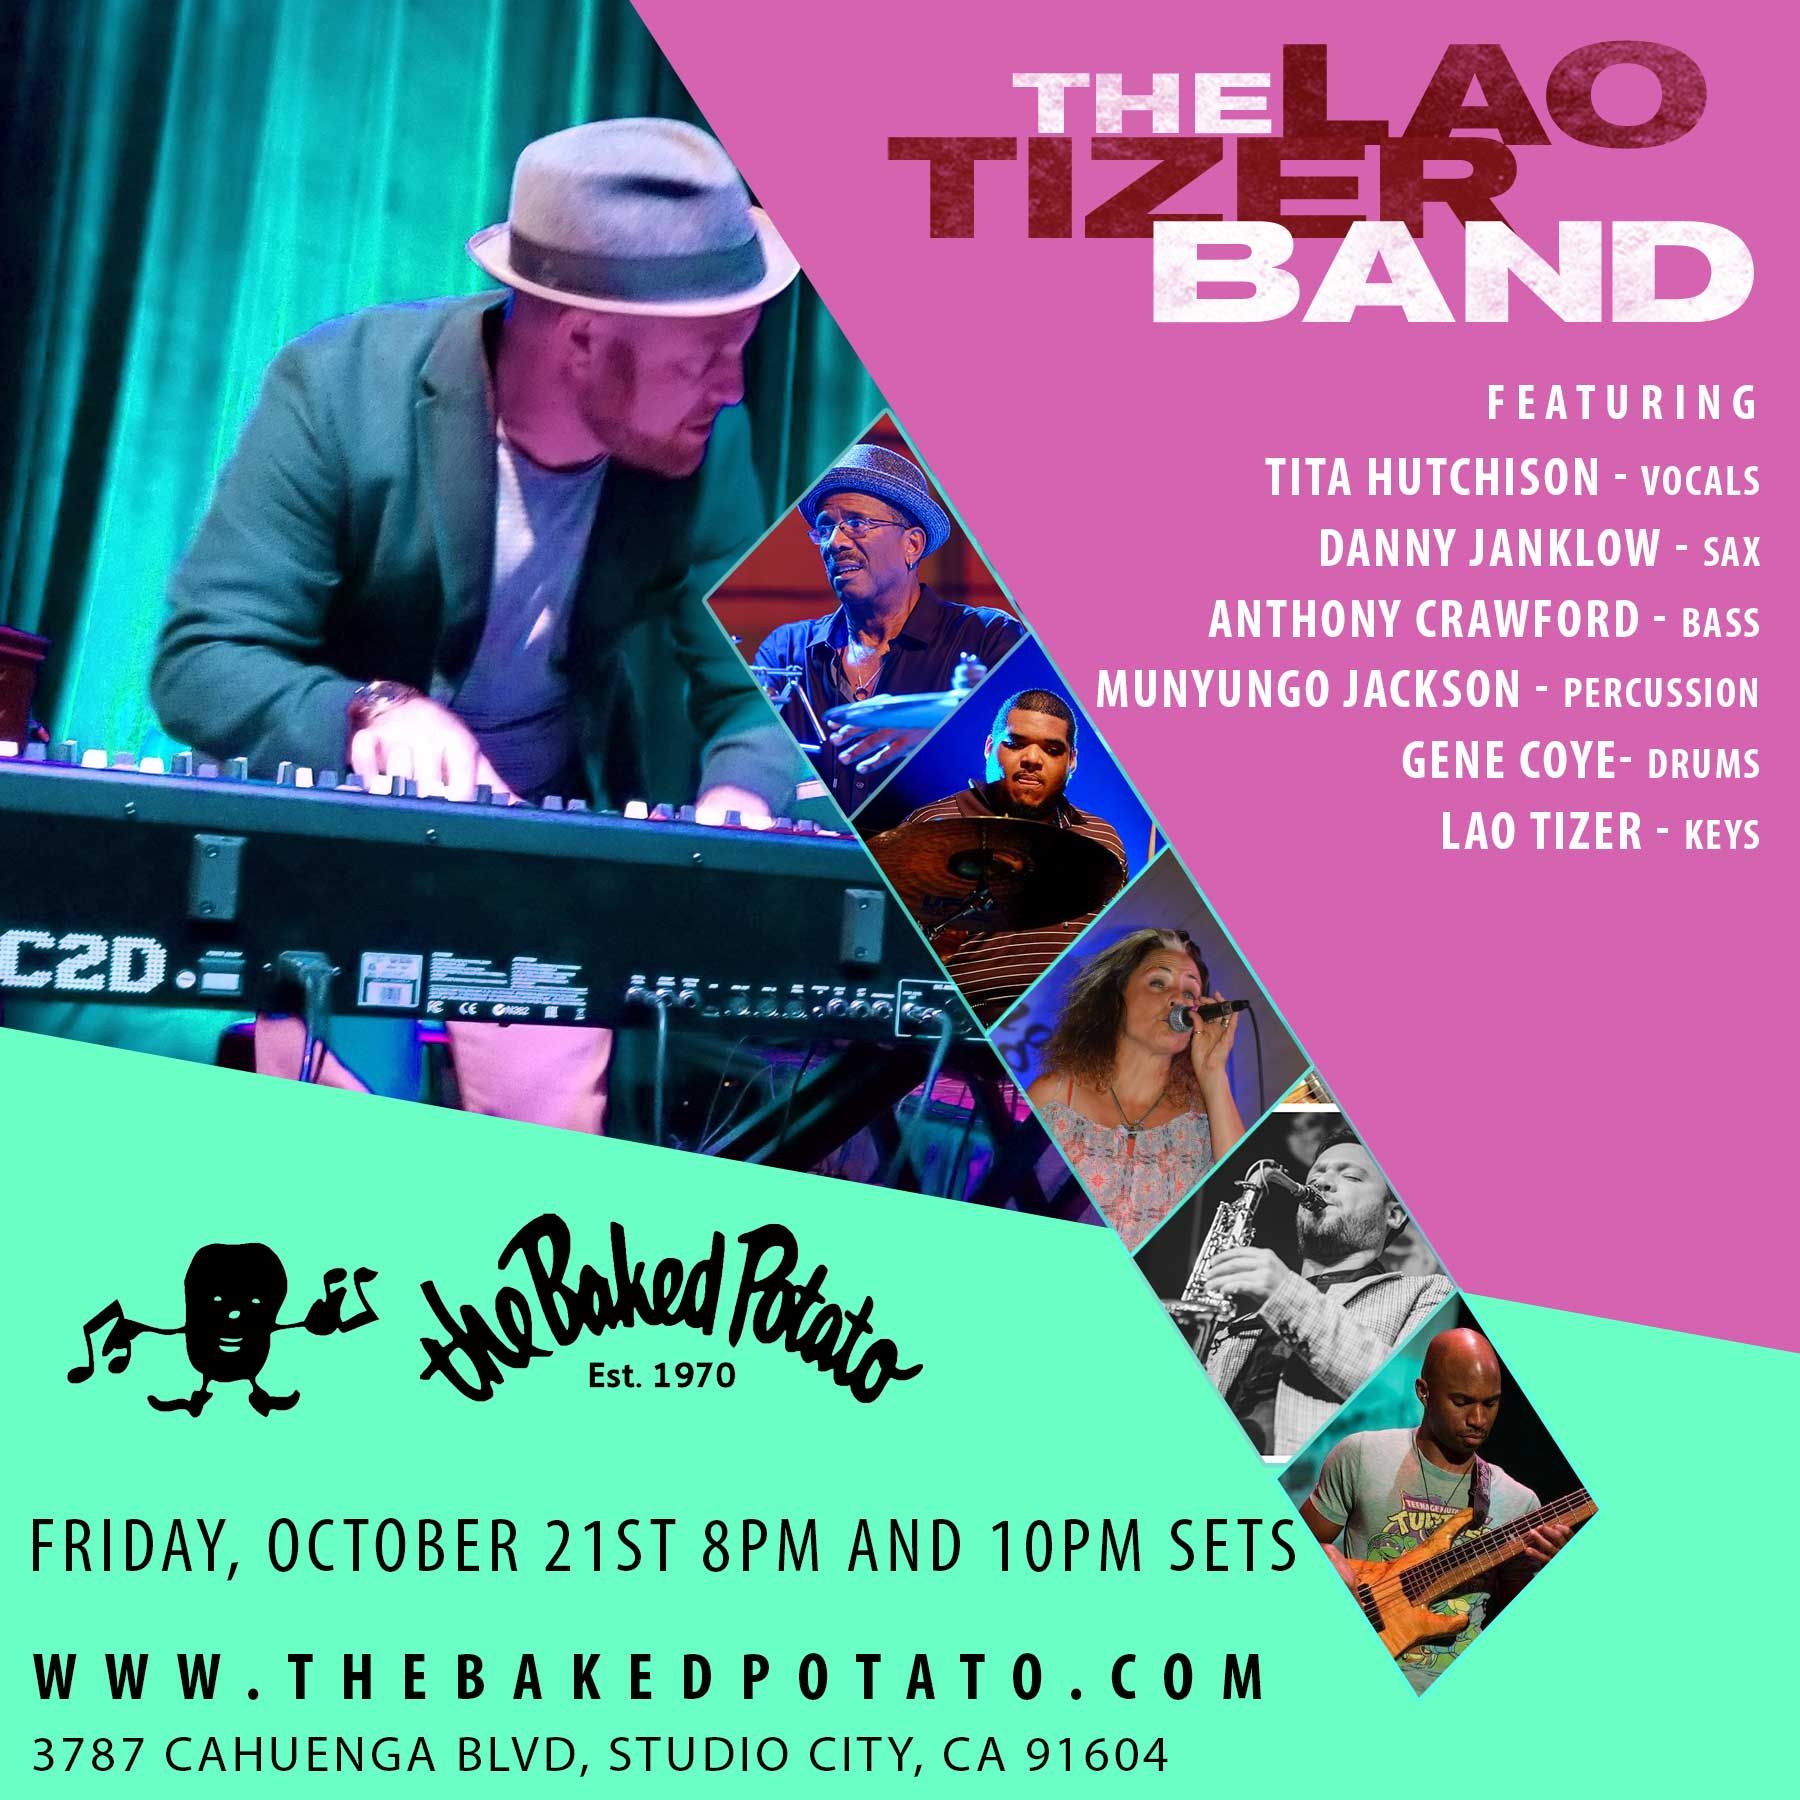 THE LAO TIZER BAND - Friday, October 21, 2022